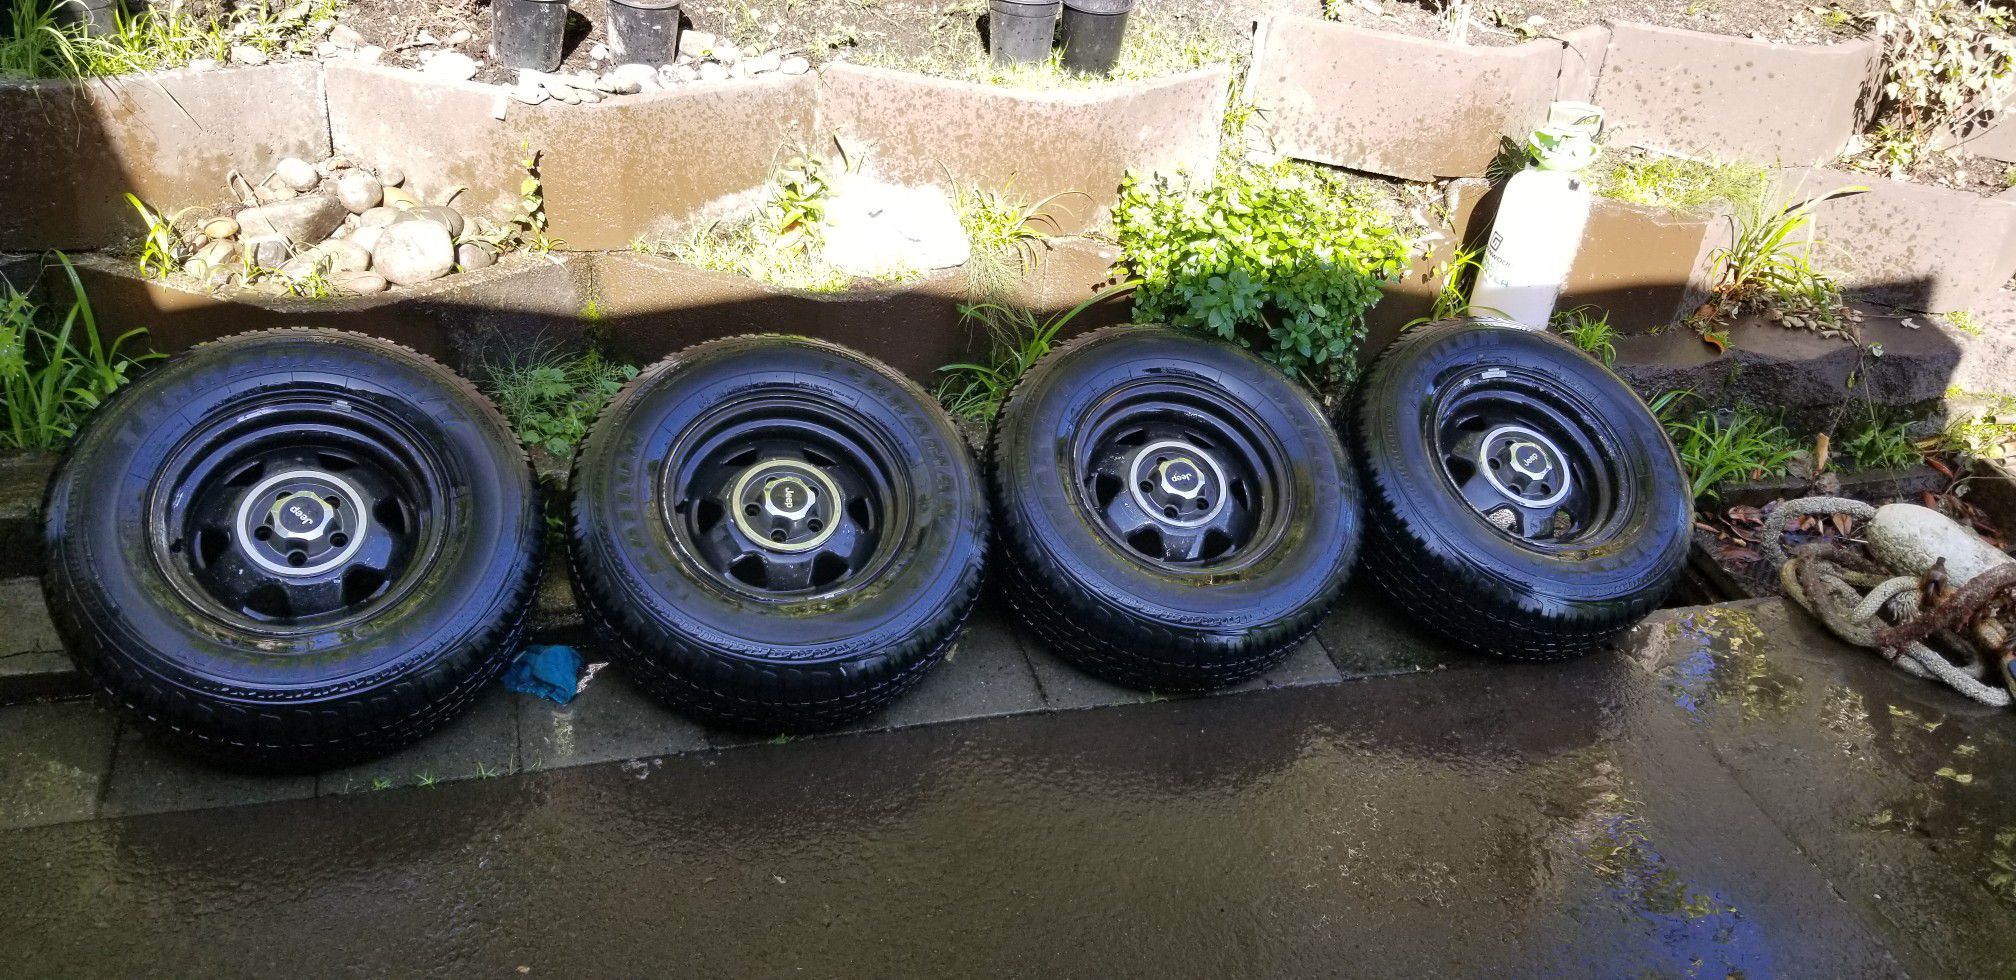 Set of 4 235/75r15 tires on jeep rims will trade for parts tools etc.